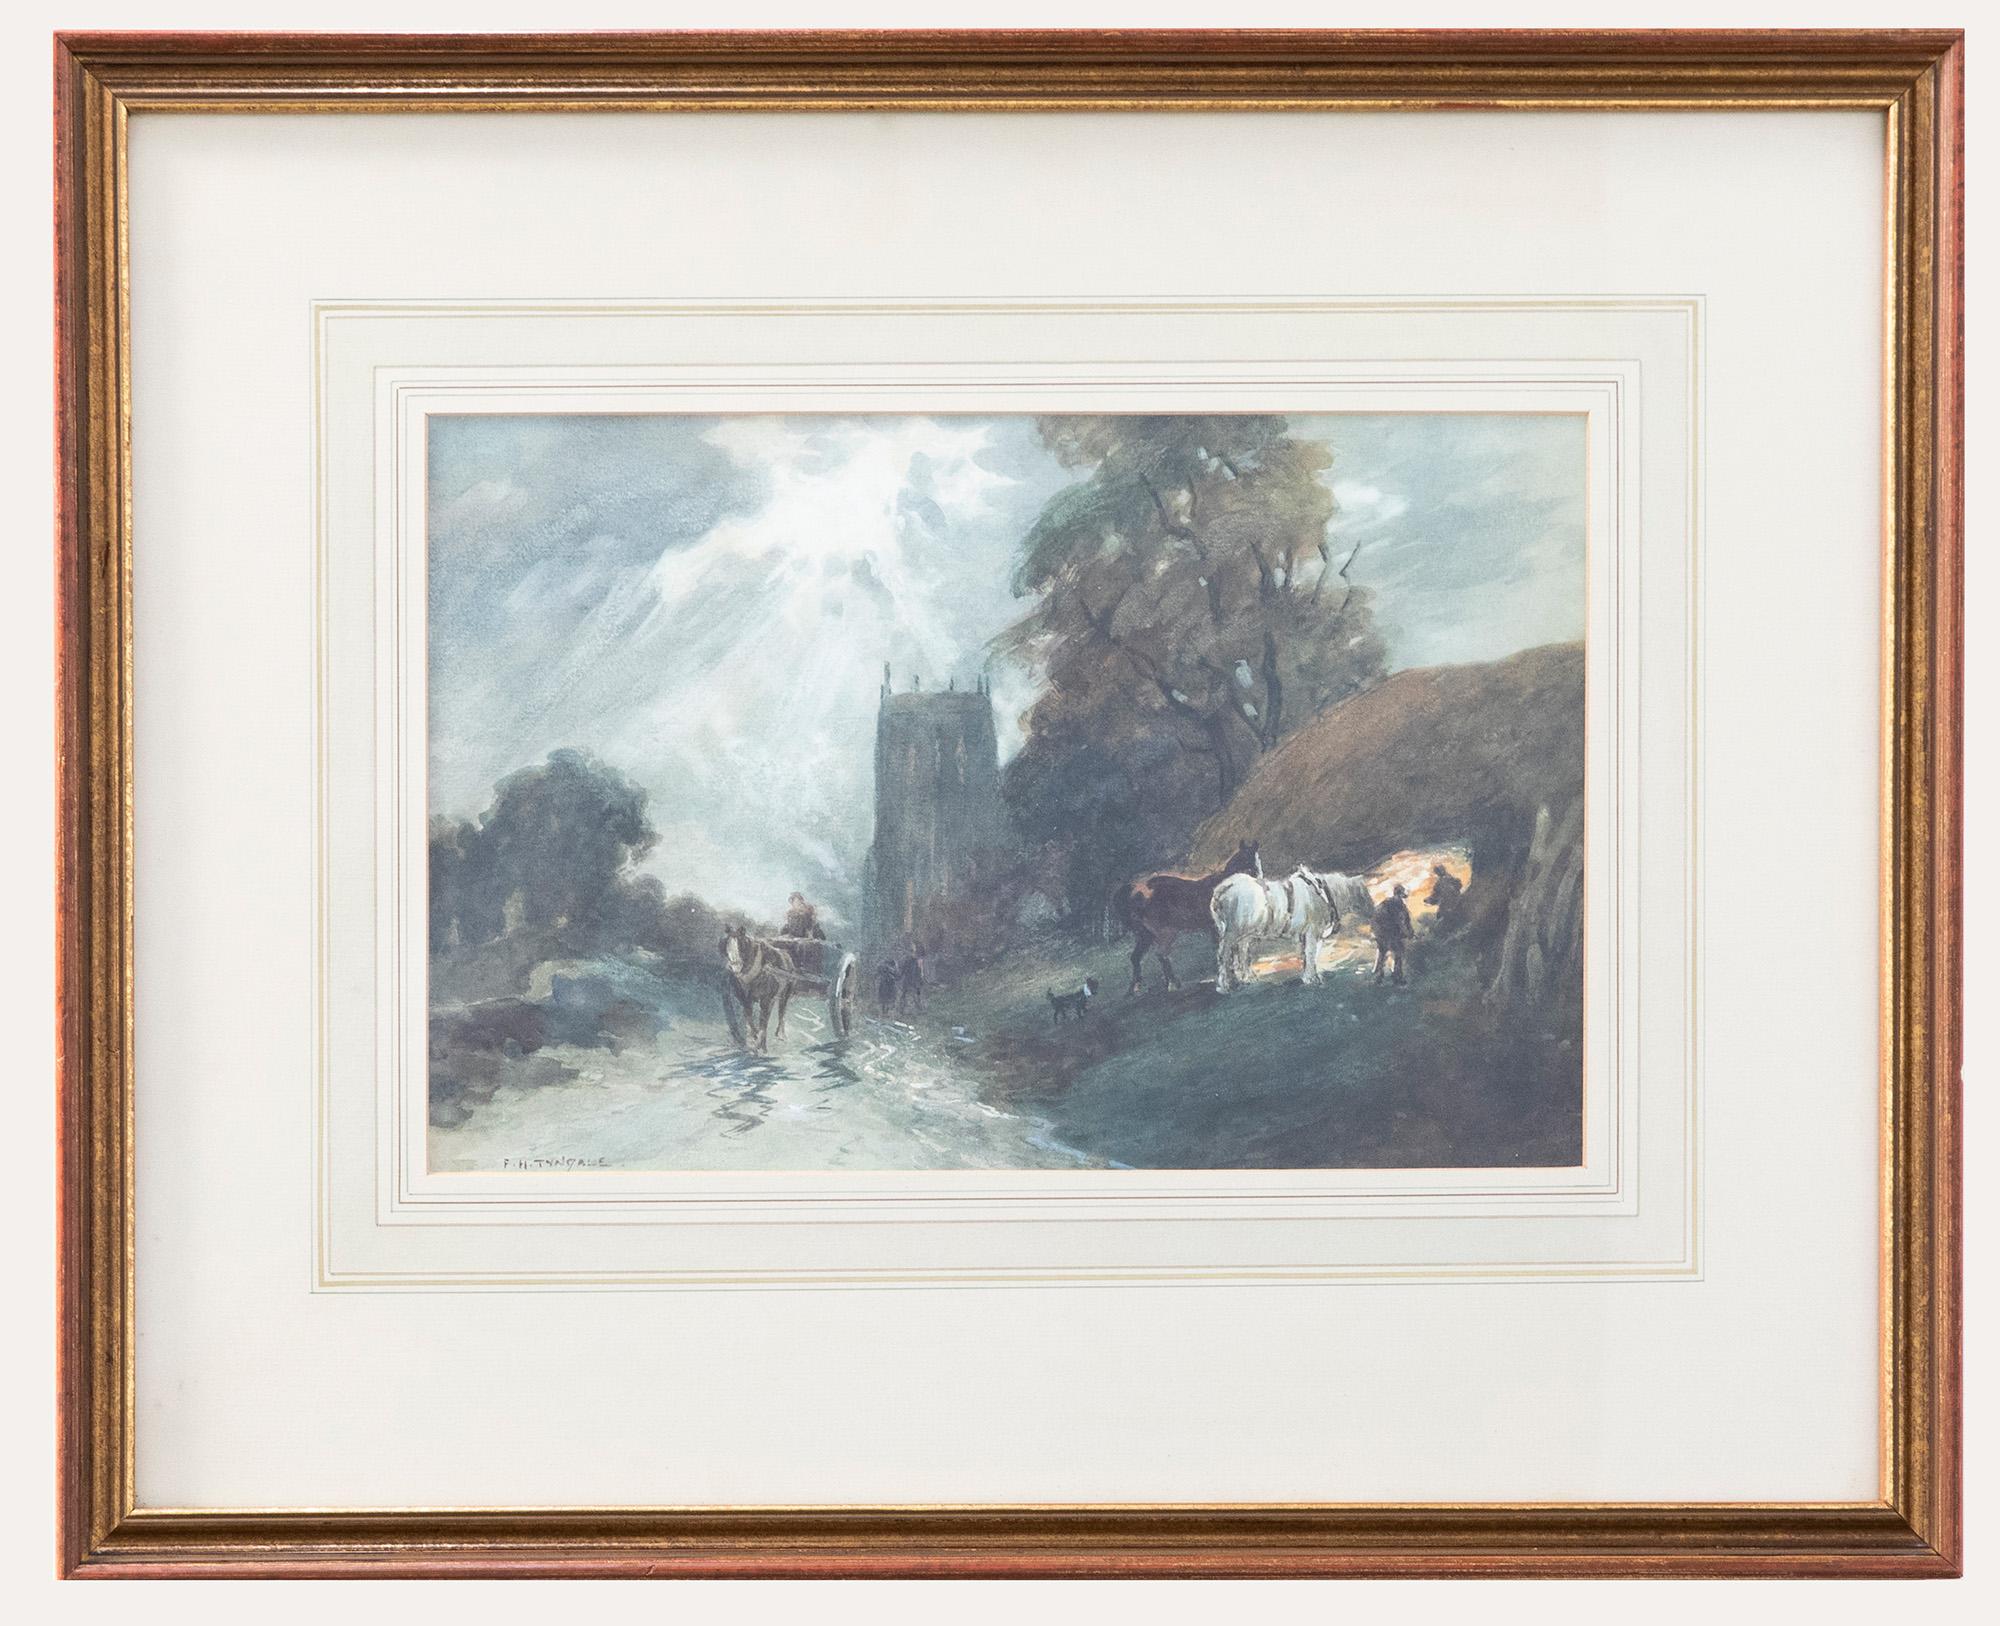 A delightful watercolour scene depicting a quaint country scene with a horse and cart. To the right of the scene two horse and a dog stand by a tall hayrick before the gloomy night sky. Signed to the lower right. Presented in a wooden frame. On